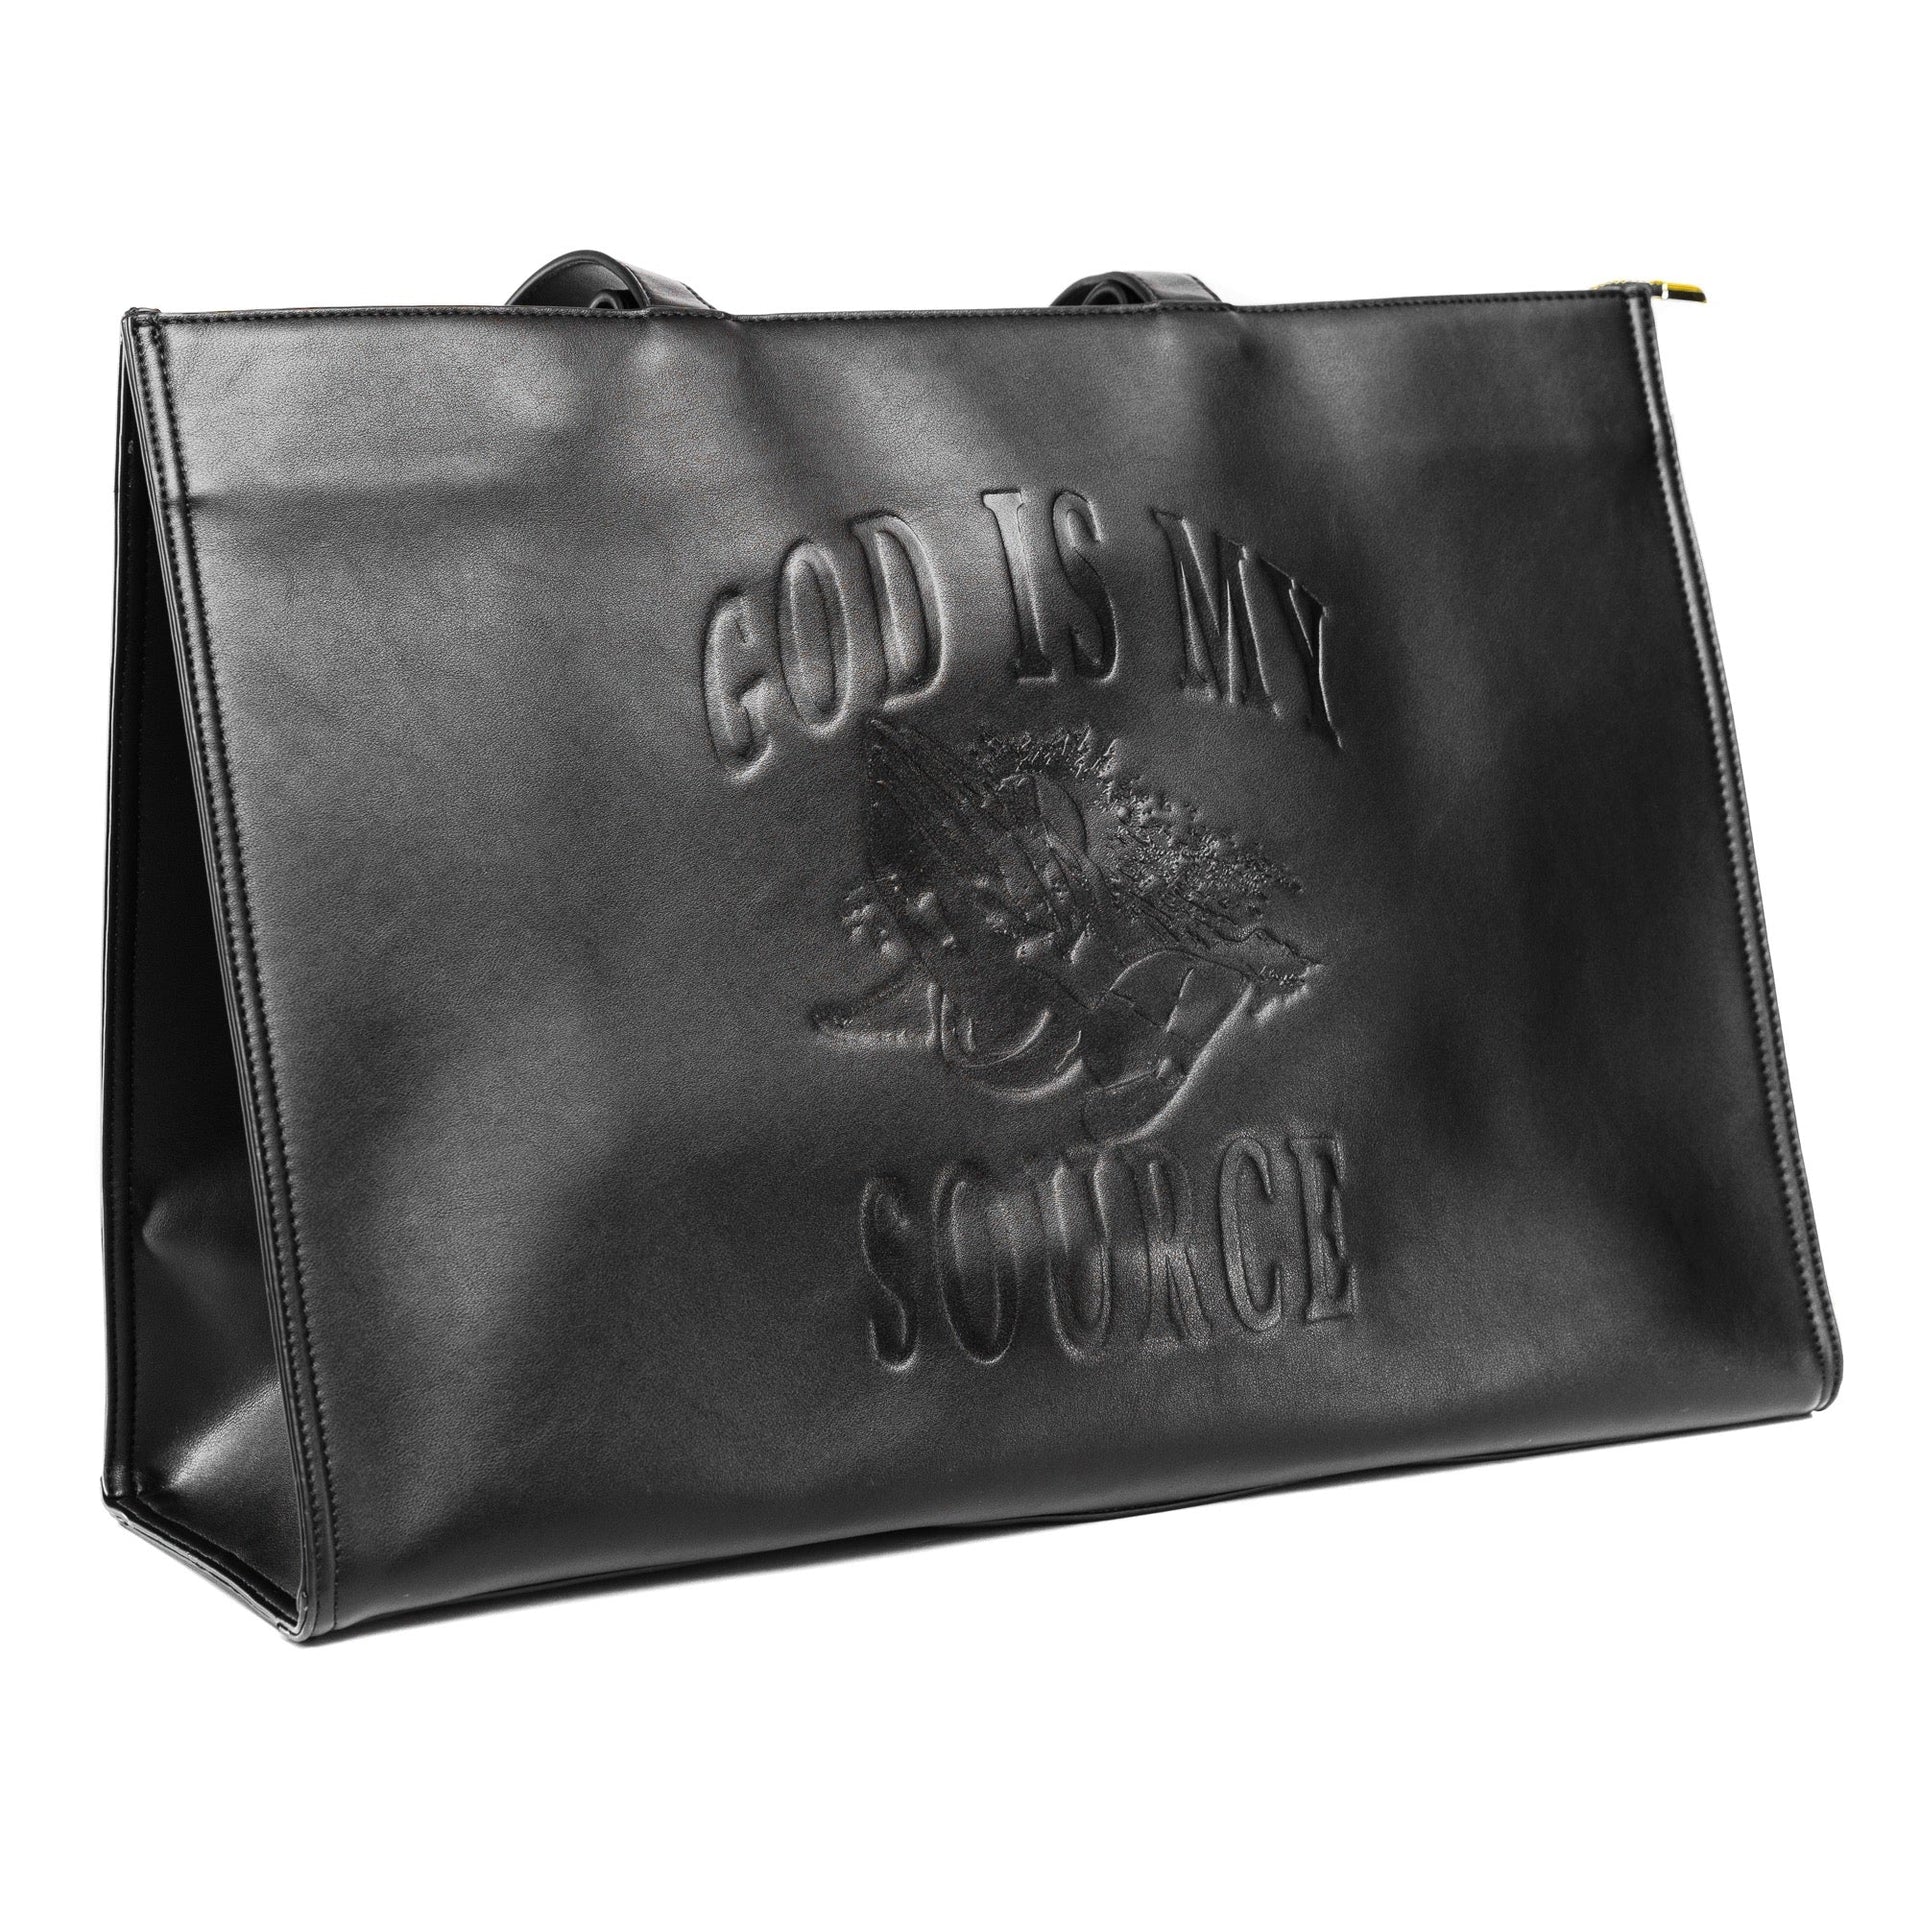 God Is My Source - Large Travel Tote - Black - God Is My Source